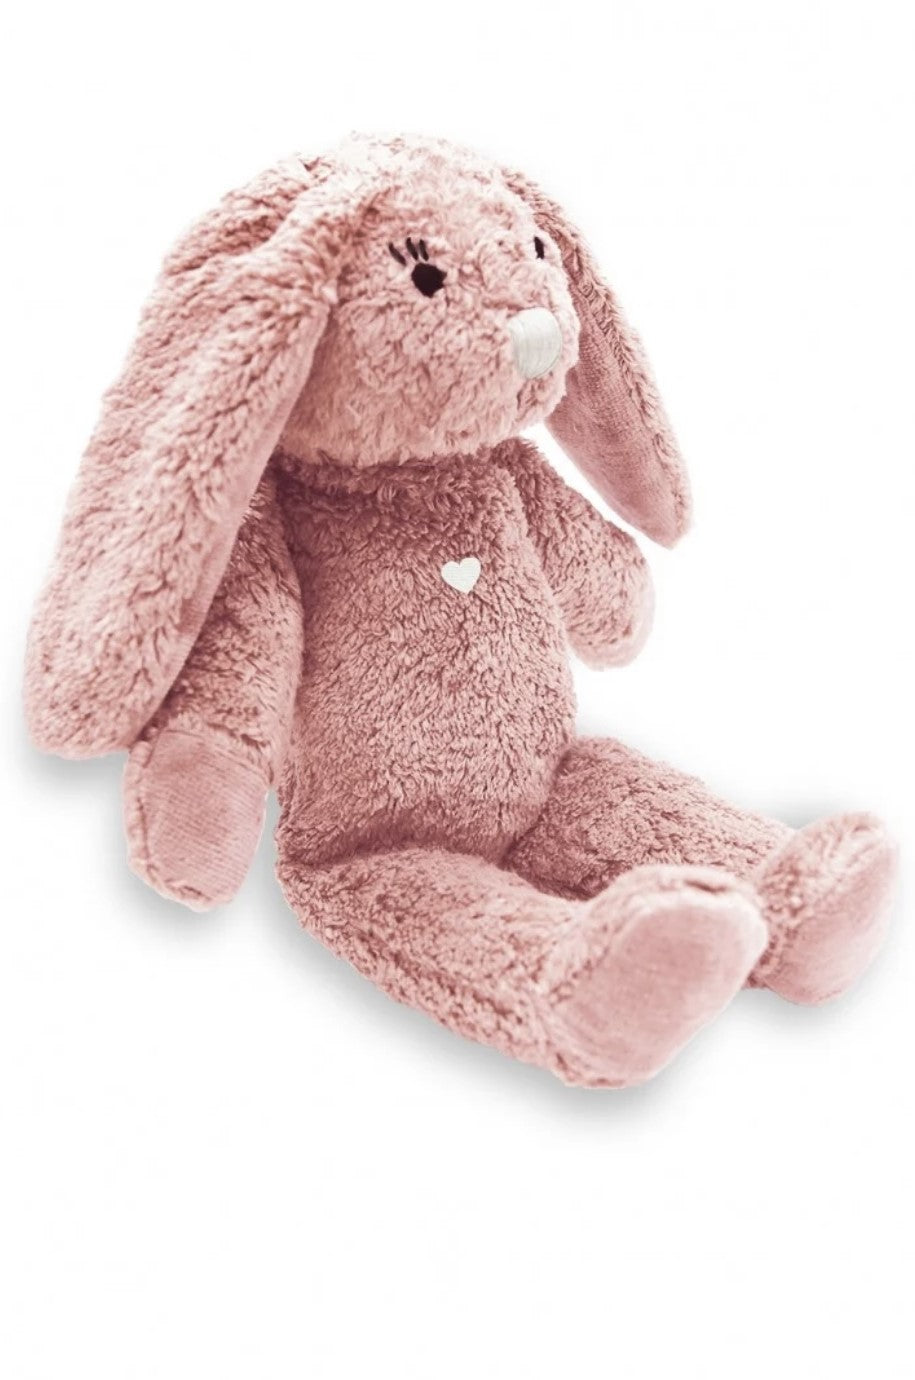 The organic cotton toy pink Bunny is handmade with organic cotton without any harmful chemicals and filled with corn fiber and fruit seeds. It is a fantastic present and gift for babies and kids! This fully sustainable baby toy and present for kids. Perfect for baby's with colic tummy. Also the best baby shower gift.